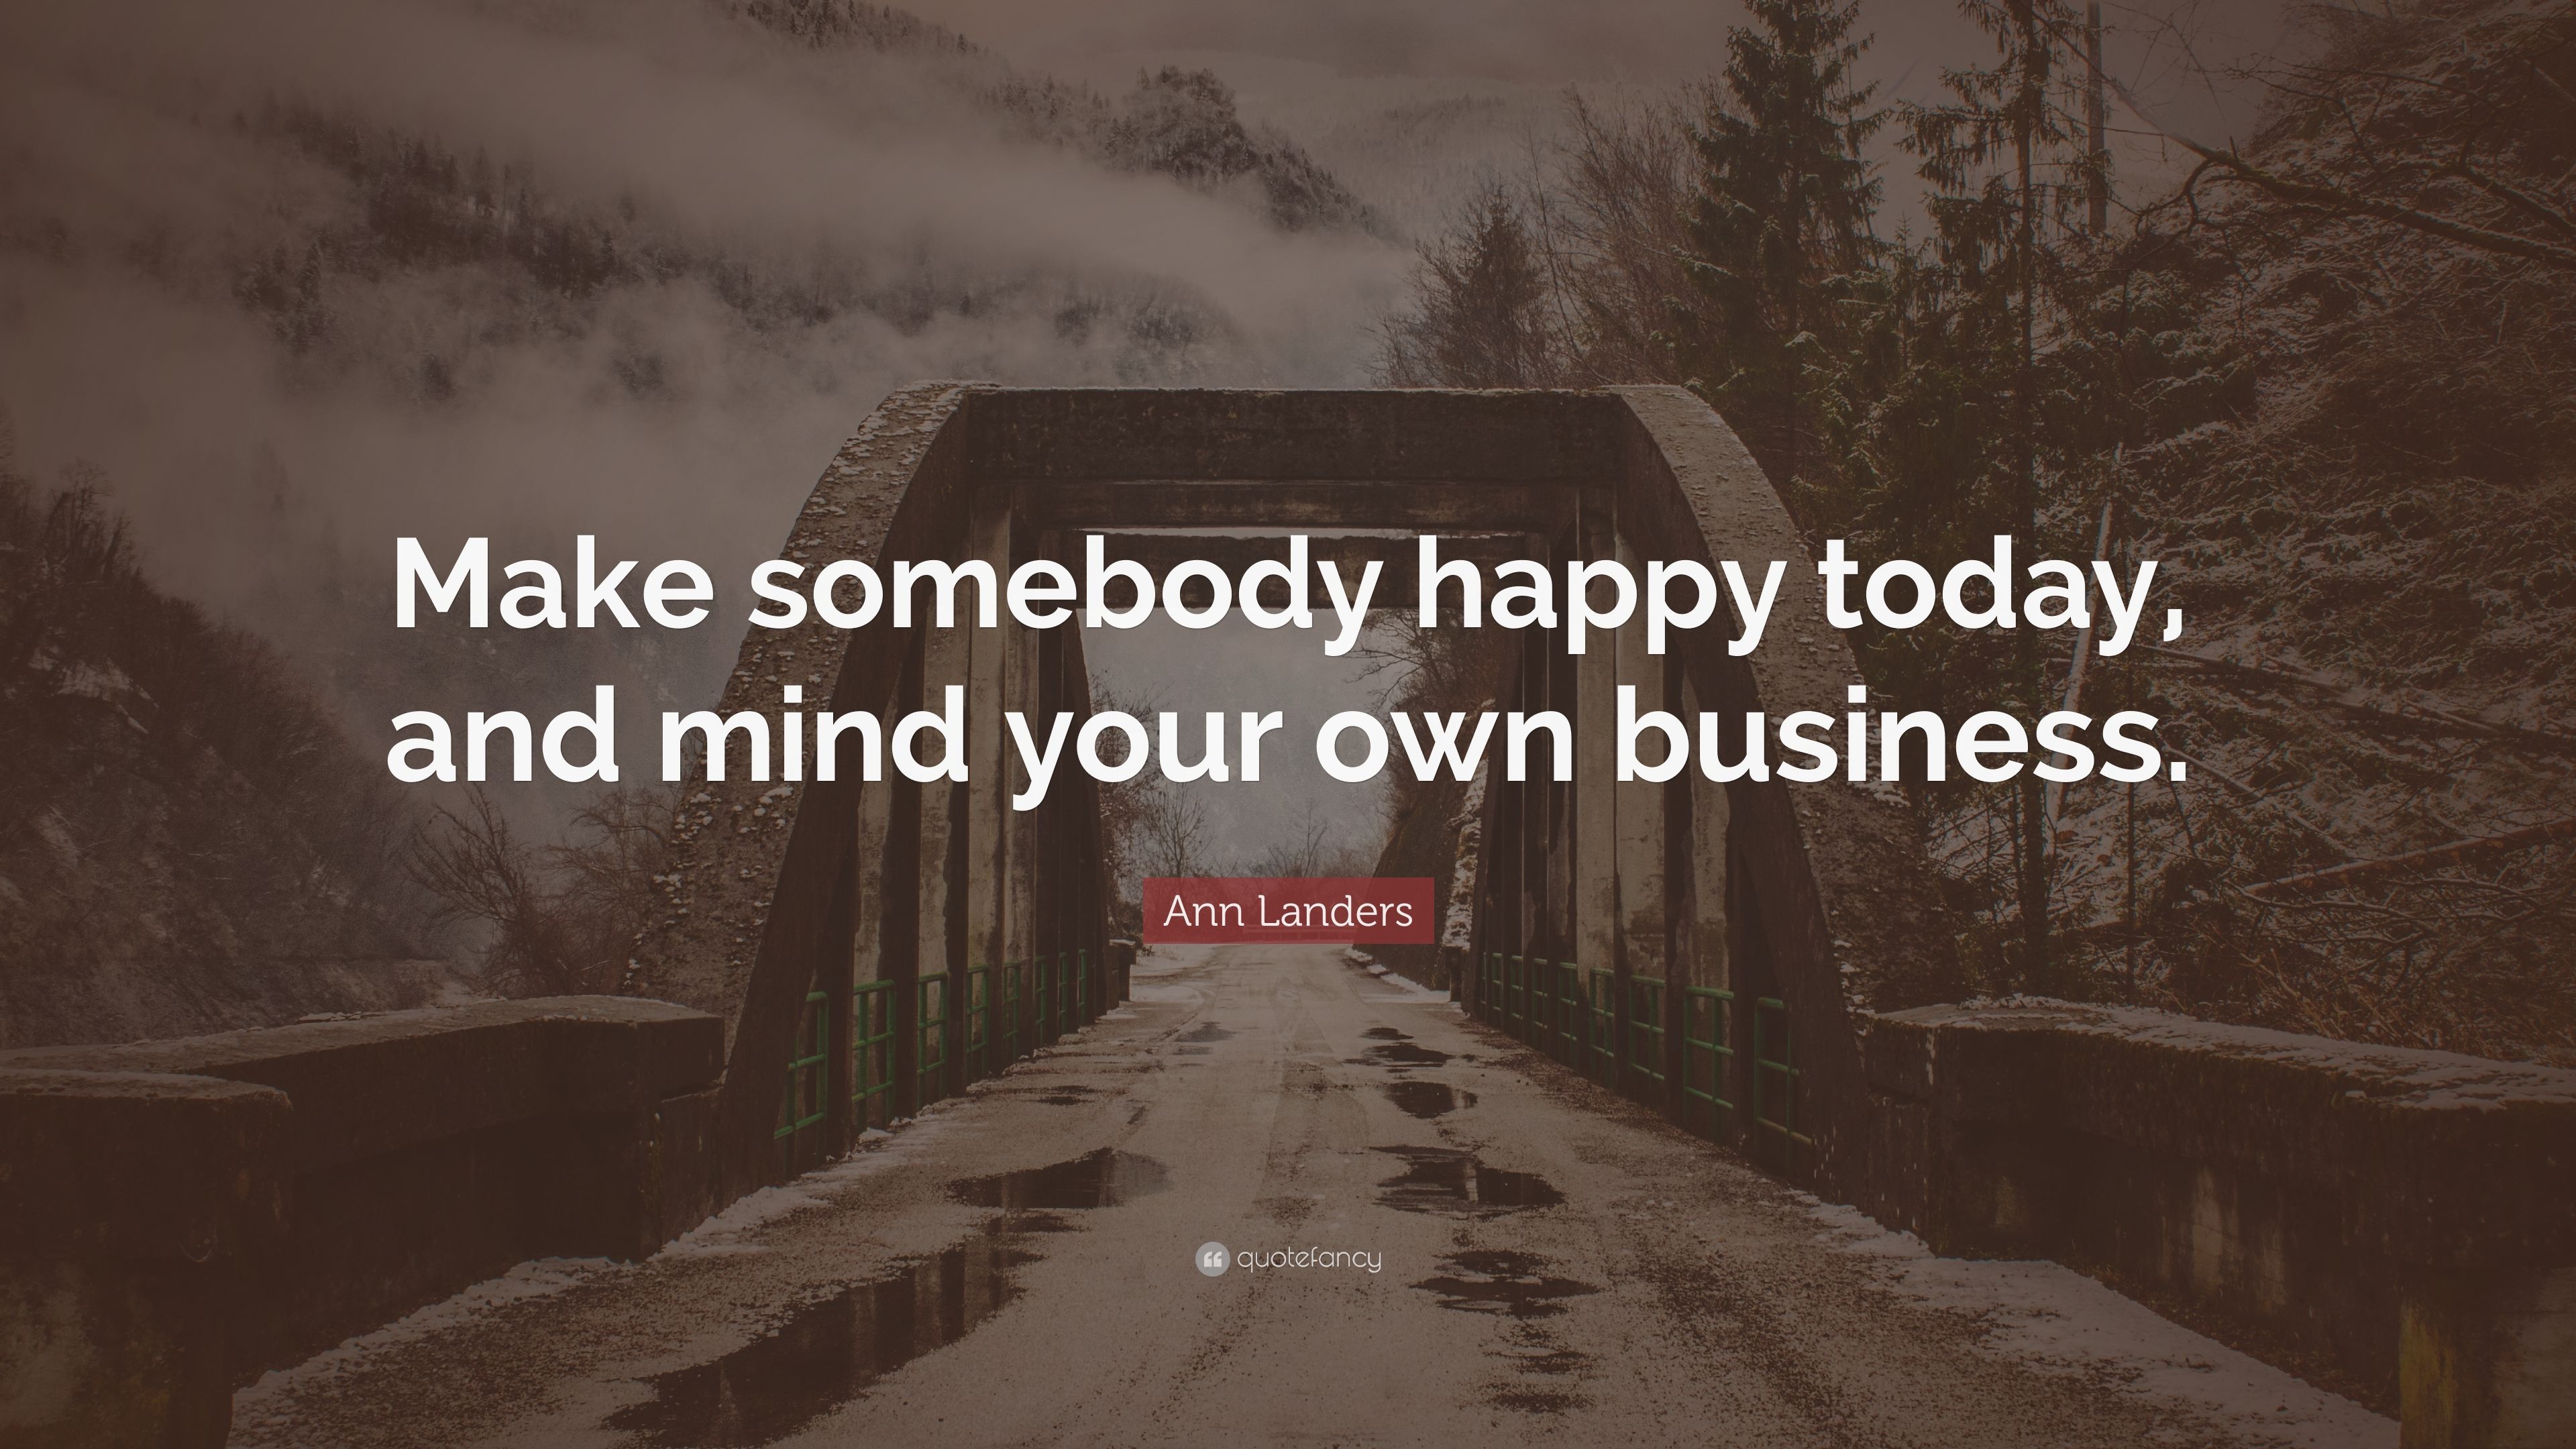 Ann Landers Quote: “Make somebody happy today, and mind your own business.”